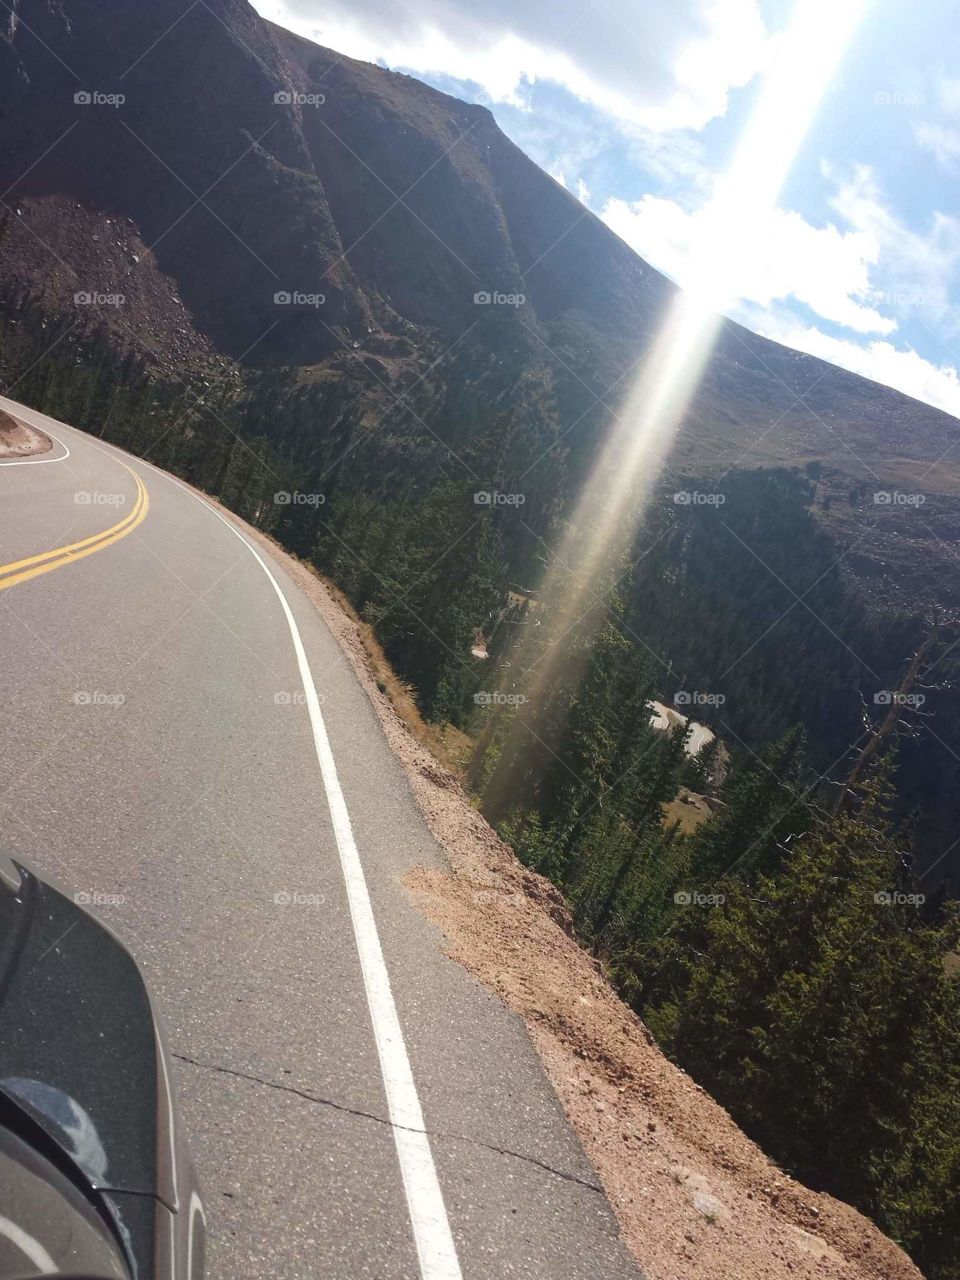 Journey up to Pikes Peak crepuscular rays